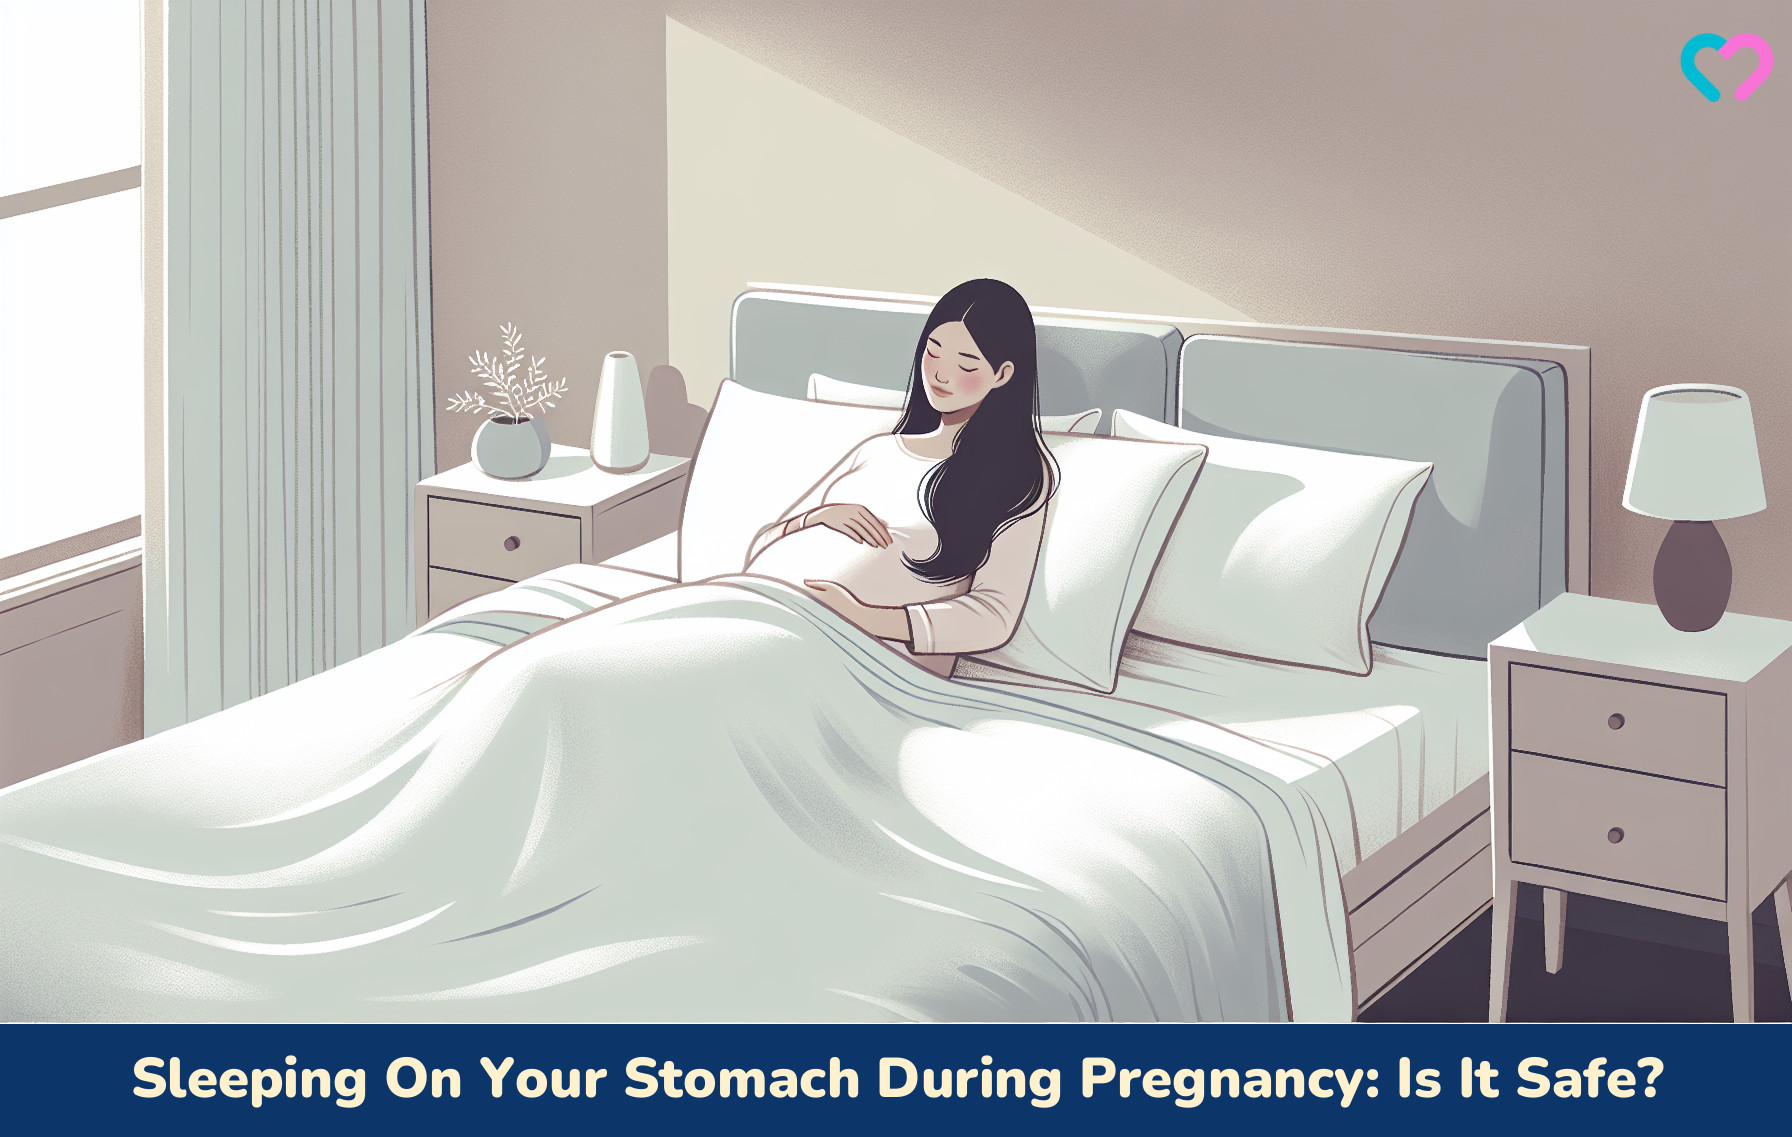 Sleep On Your Stomach During Pregnancy_illustration